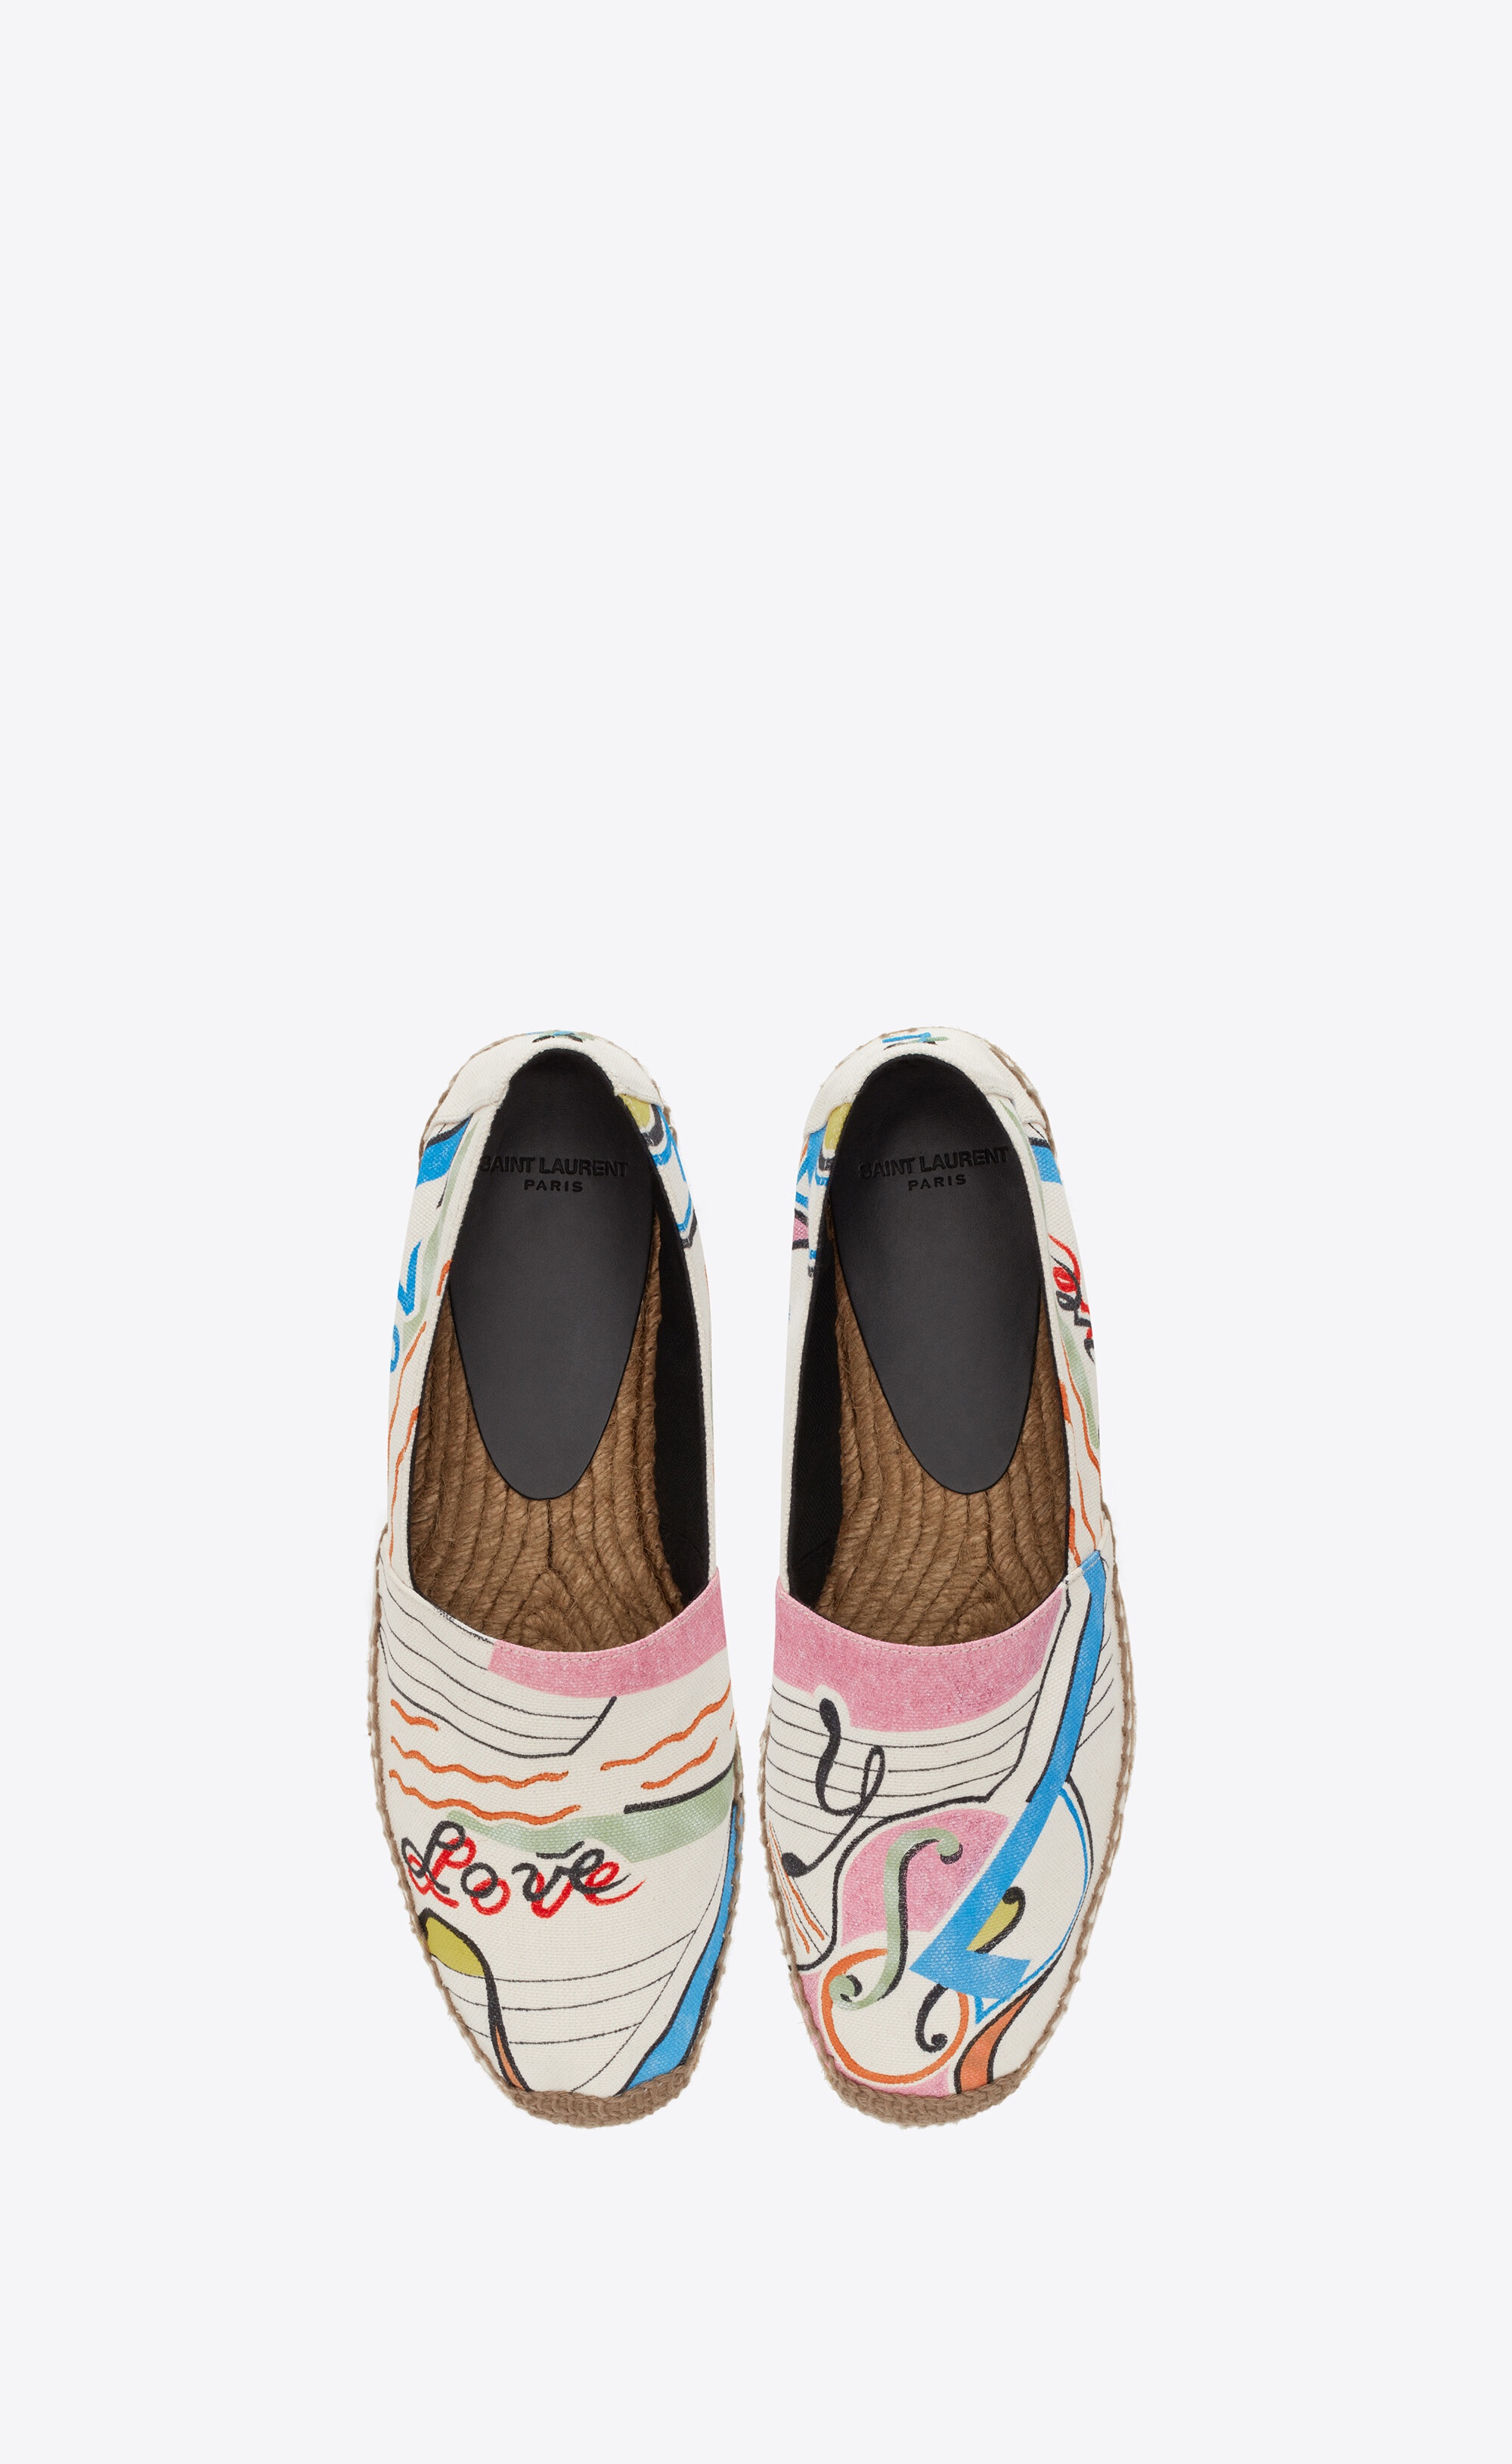 ysl embroidered espadrilles in love 1980-print canvas - 2